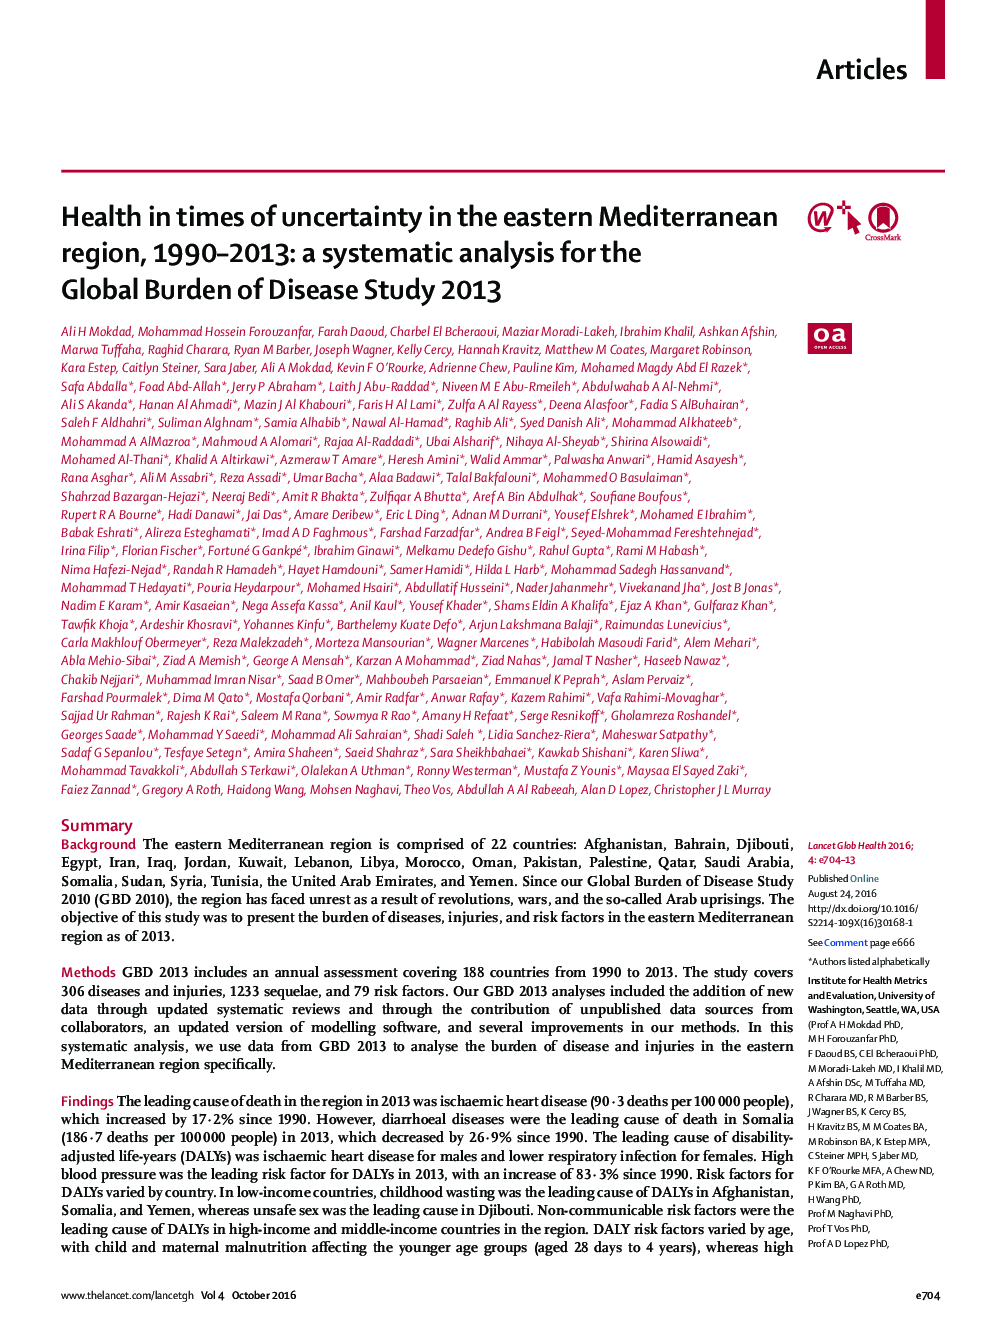 Health in times of uncertainty in the eastern Mediterranean region, 1990–2013: a systematic analysis for the Global Burden of Disease Study 2013